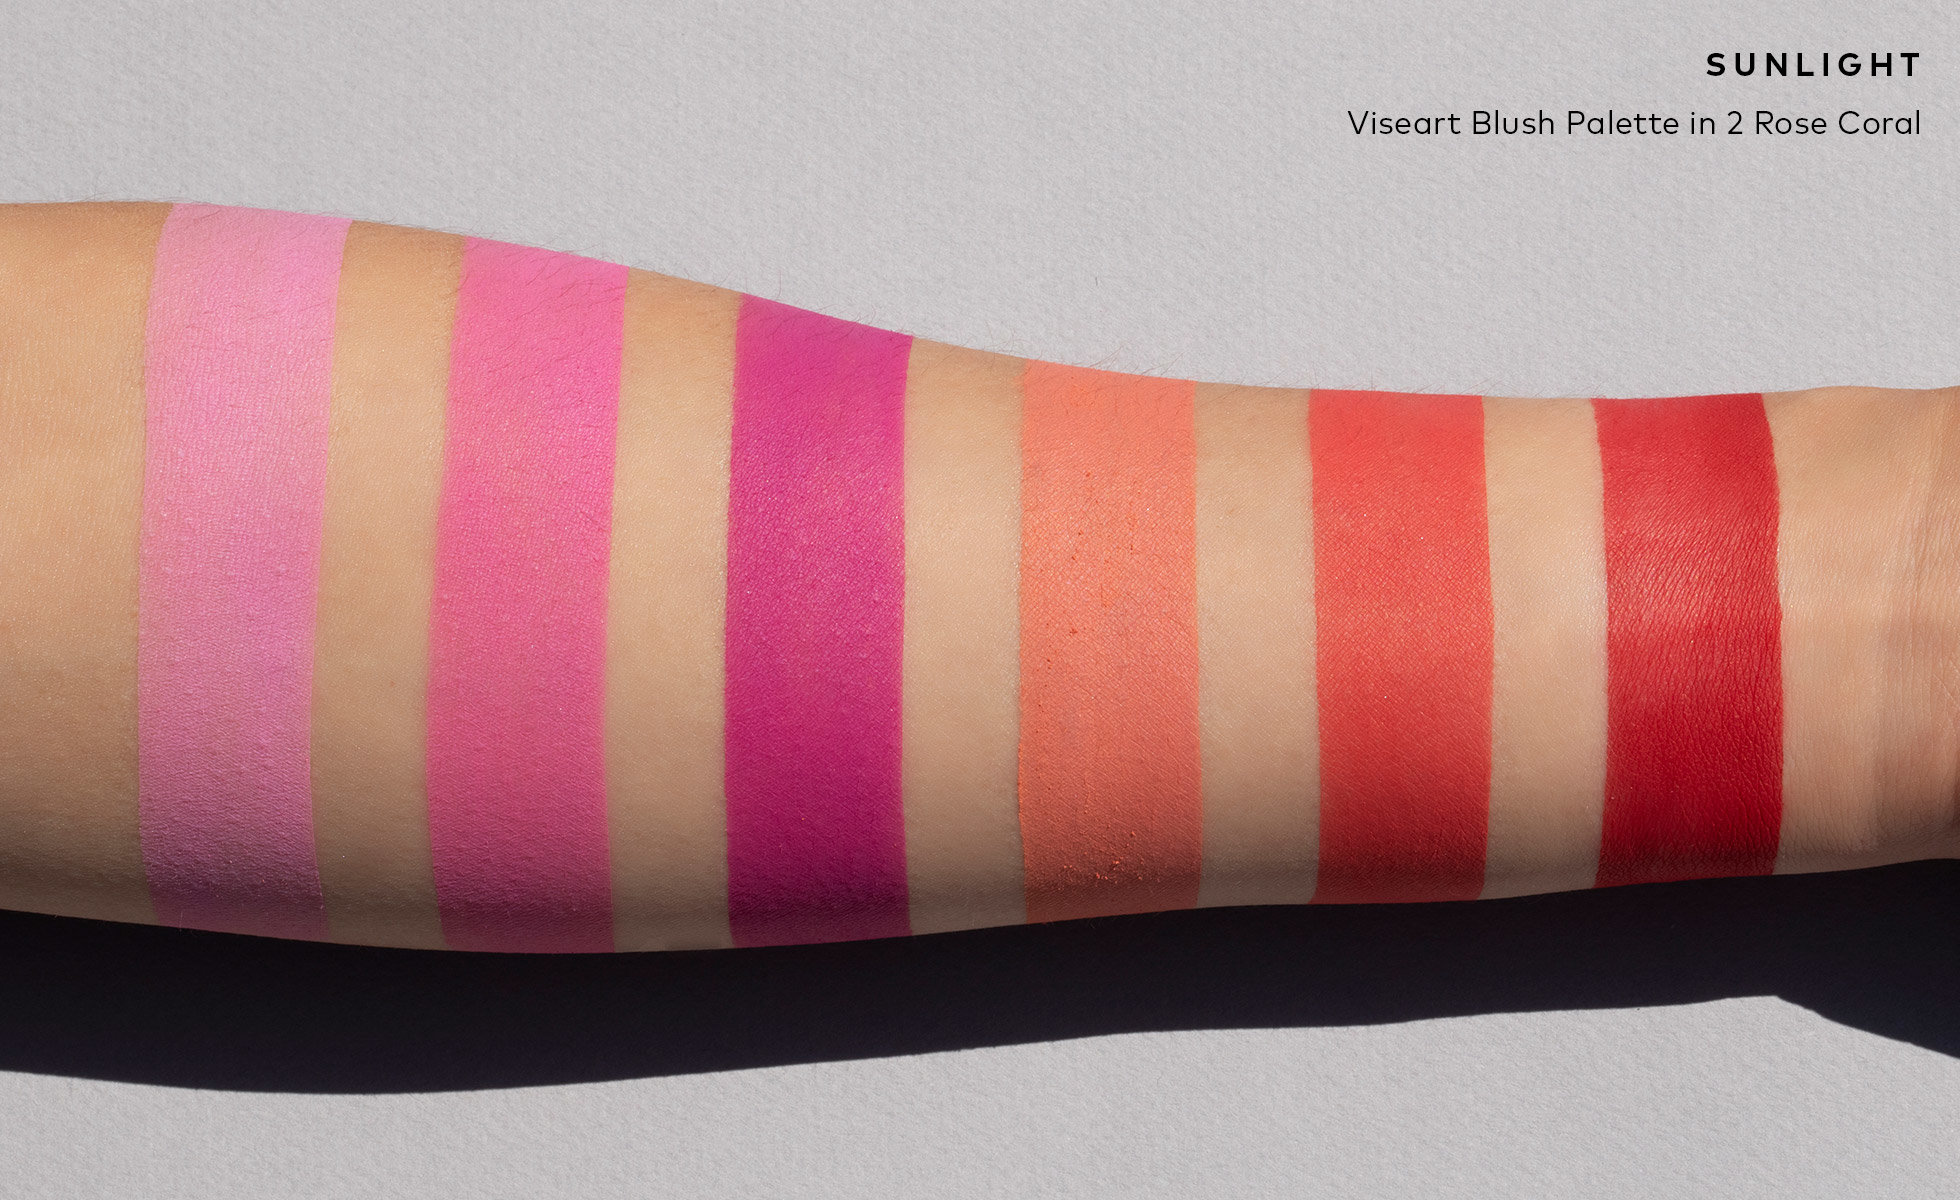 Viseart Blush Palette 2 Rose Coral Arm Swatches in Sunlight